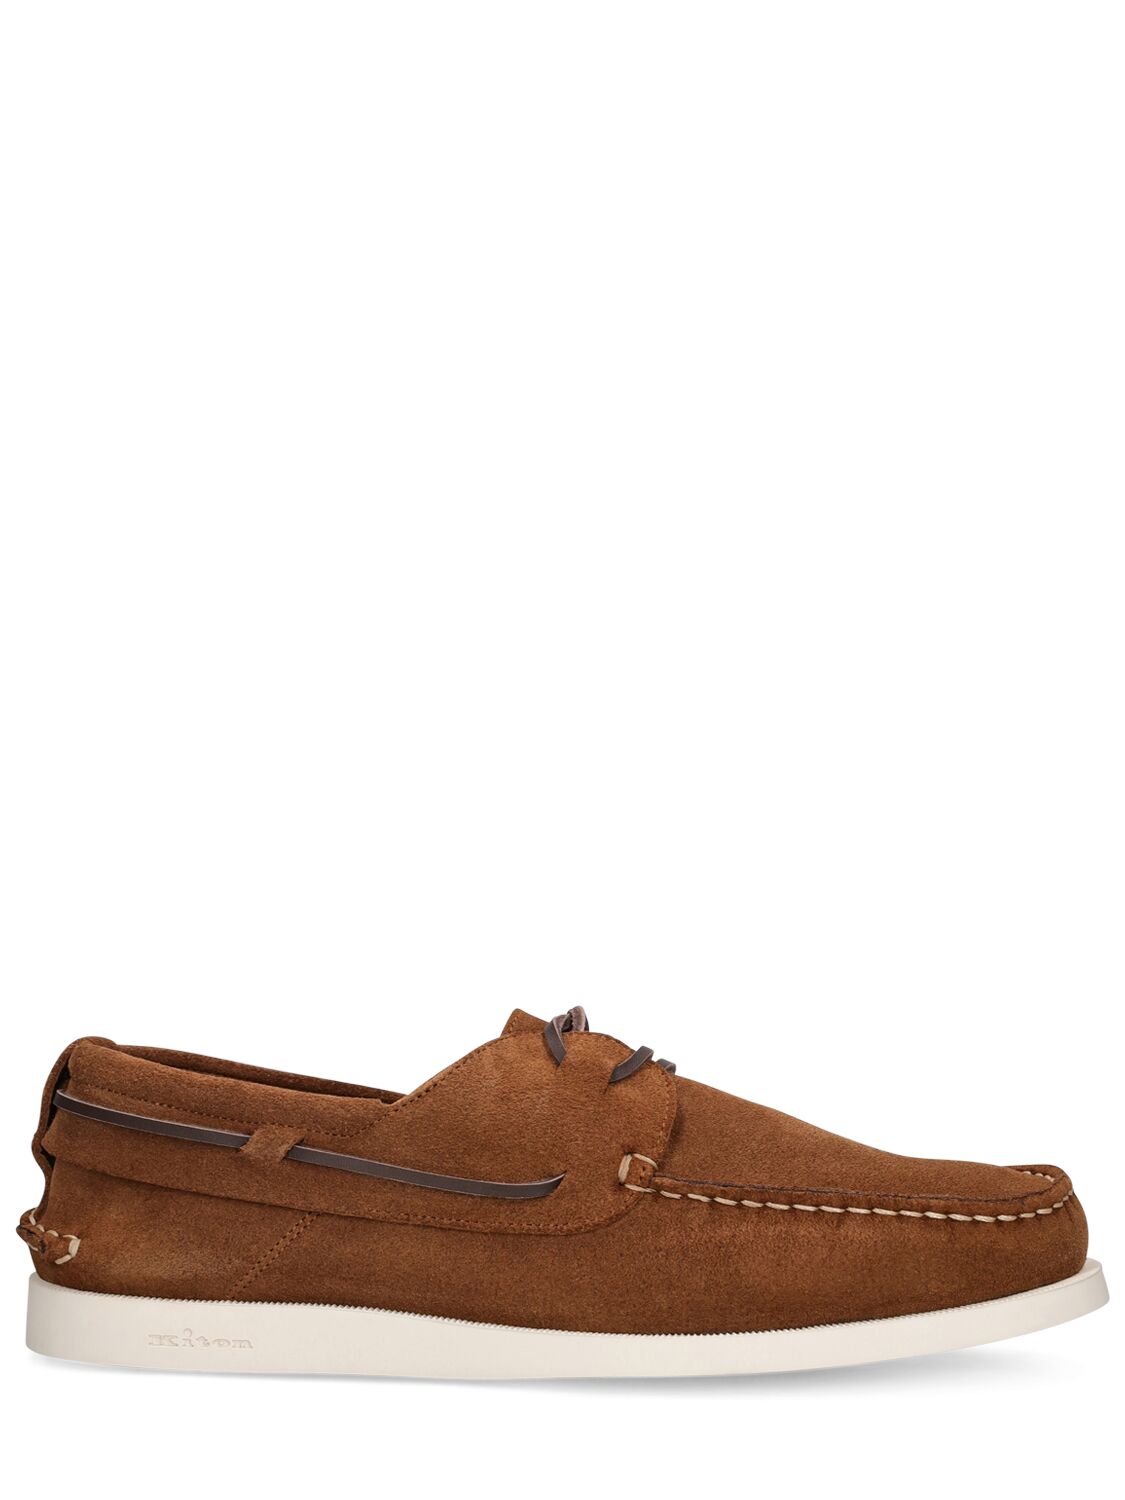 Image of Suede Boat Shoe Loafers